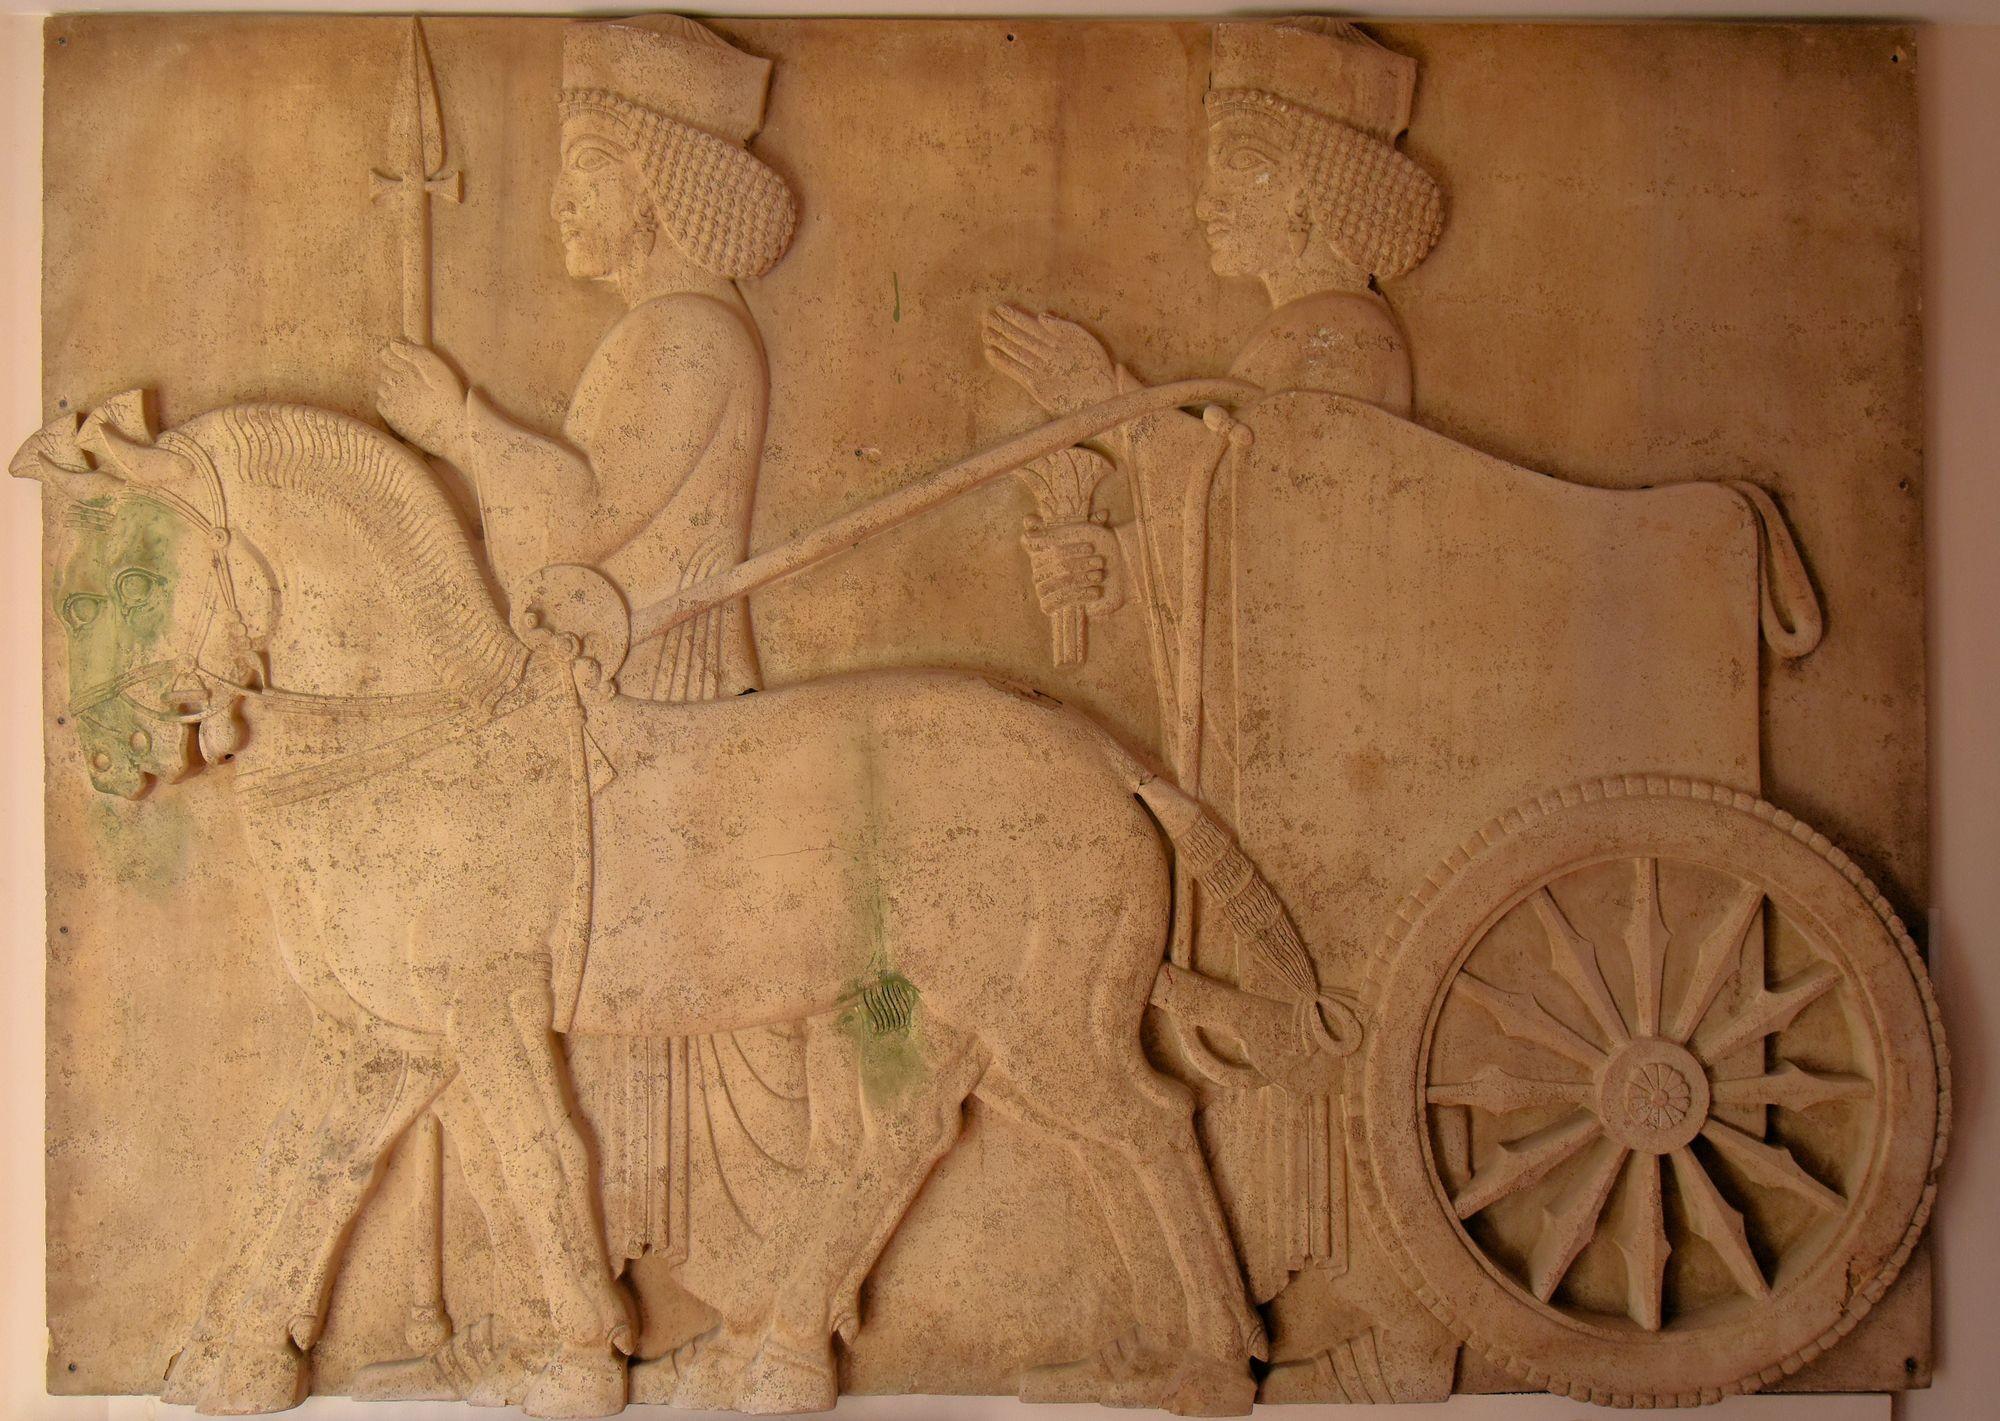 Fiberglass Mesopotamian Wall Art Movie Prop from the classic Ben-Hur, 1959 starring Charlton Heston won at the time a record-breaking 11 academy awards. The fiberglass relief mimics a stone carving of 2 warriors with a chariot and horse. It comes